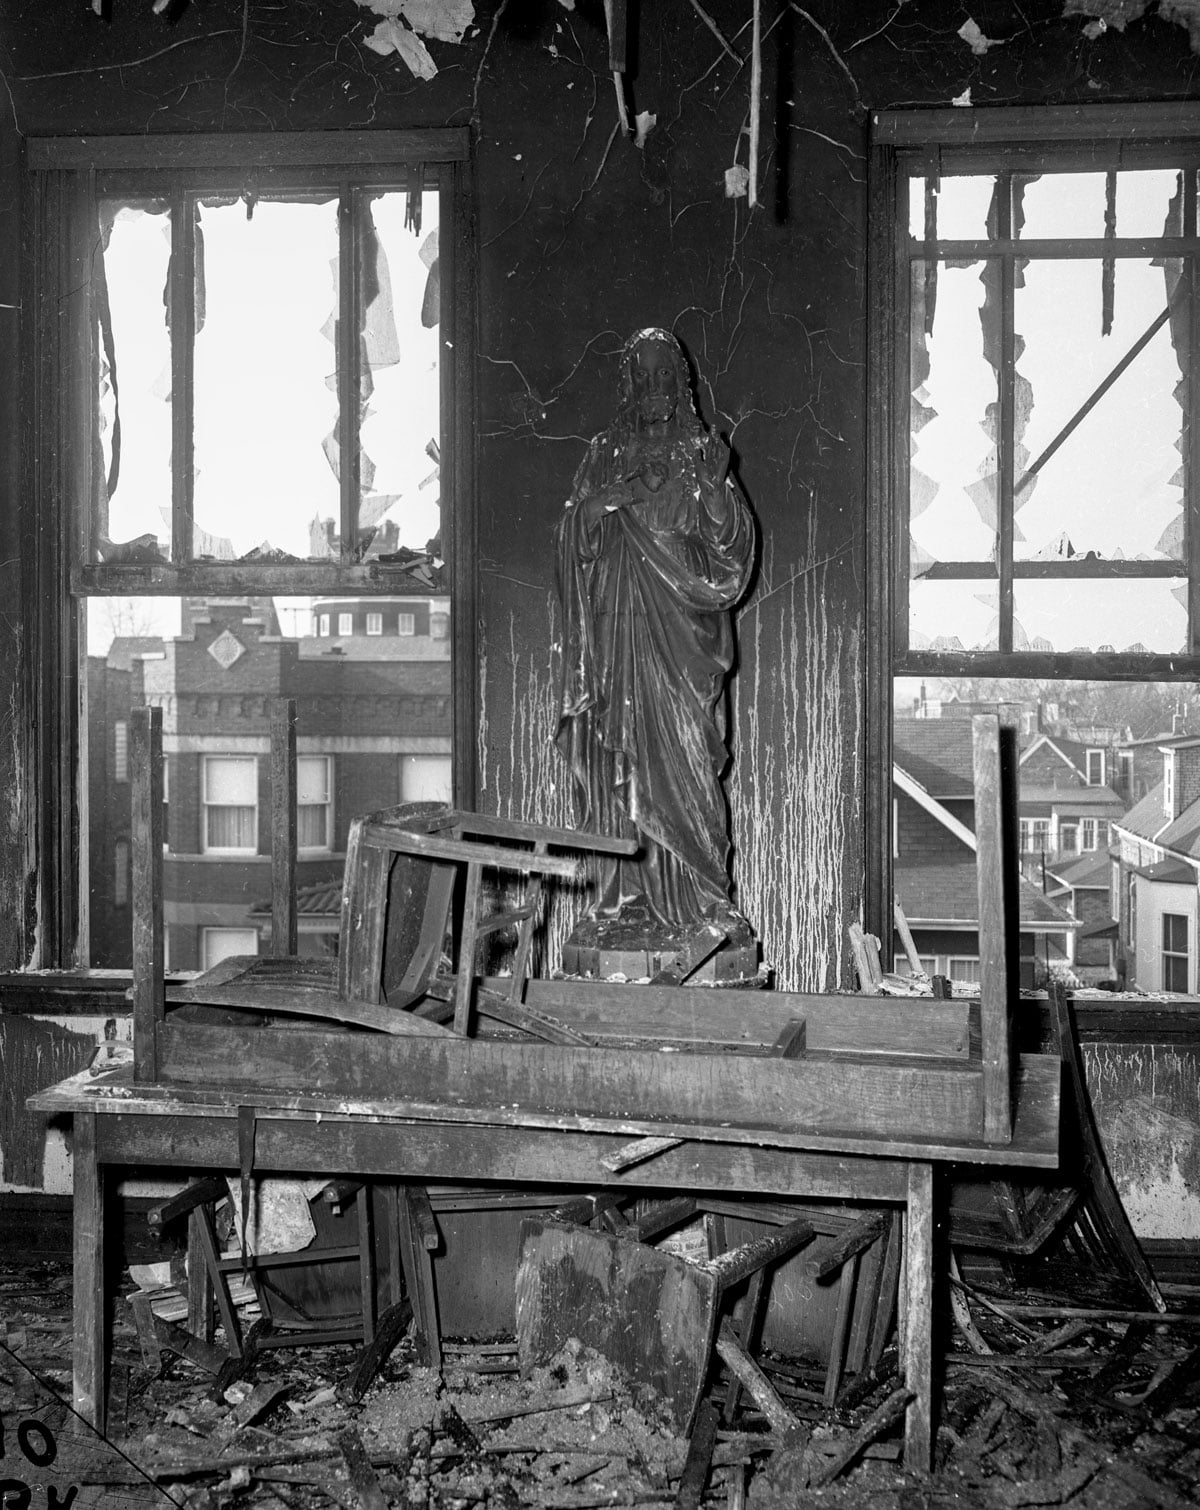 A statue of Jesus was left burned in the aftermath of the fire